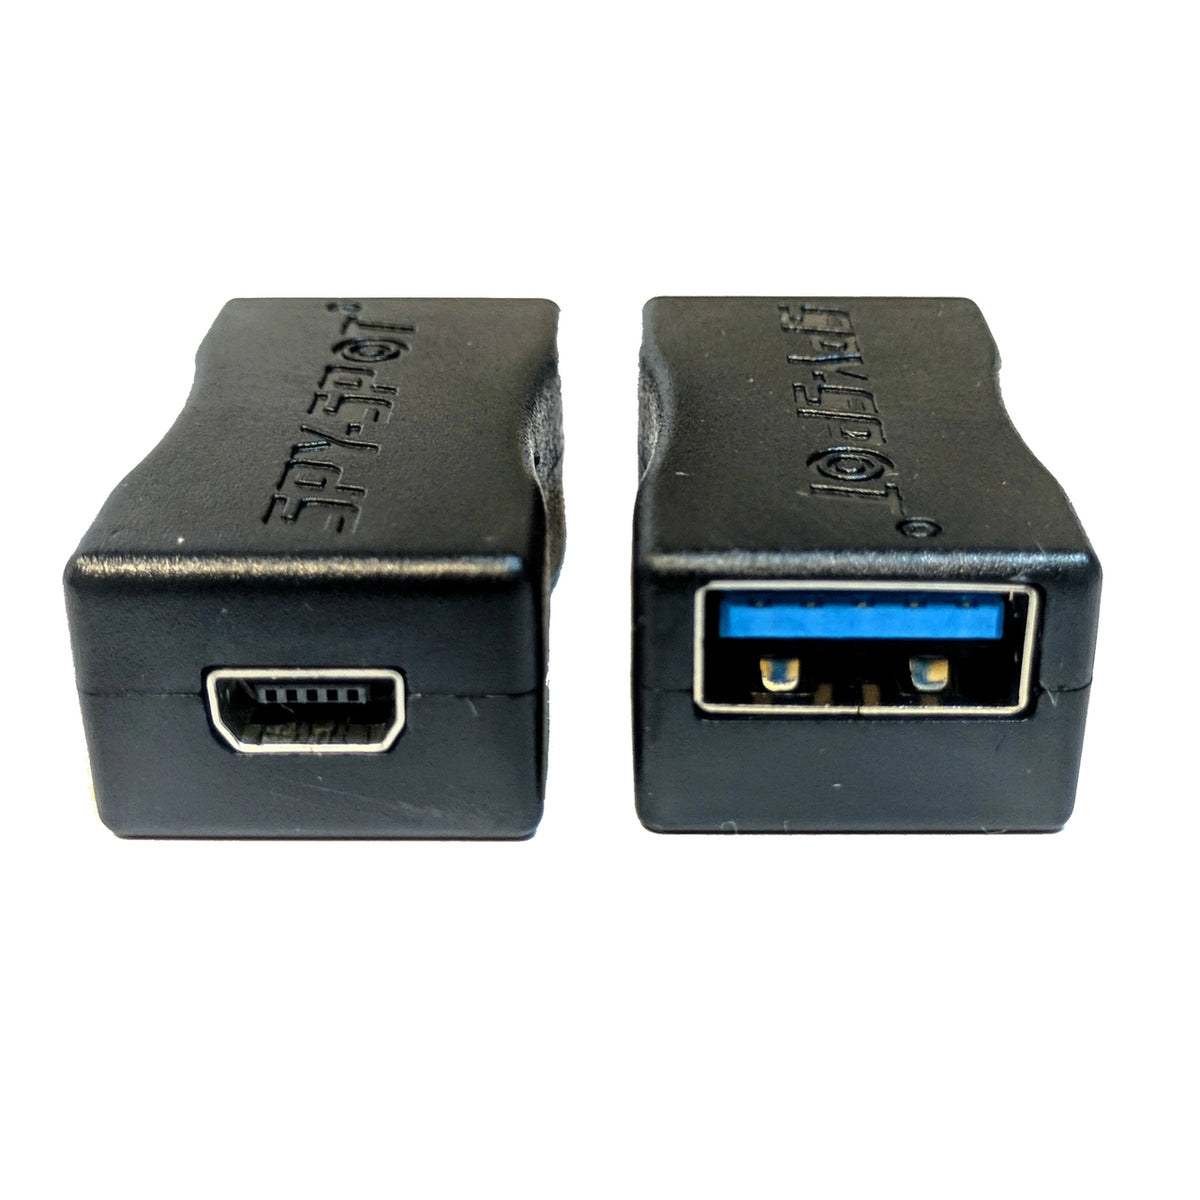 SpySpot Extended Slim Battery for GPS Trackers and Battery Charger - Works with GL 200, GL 300, GL300W, GL-300MA, GL300MG